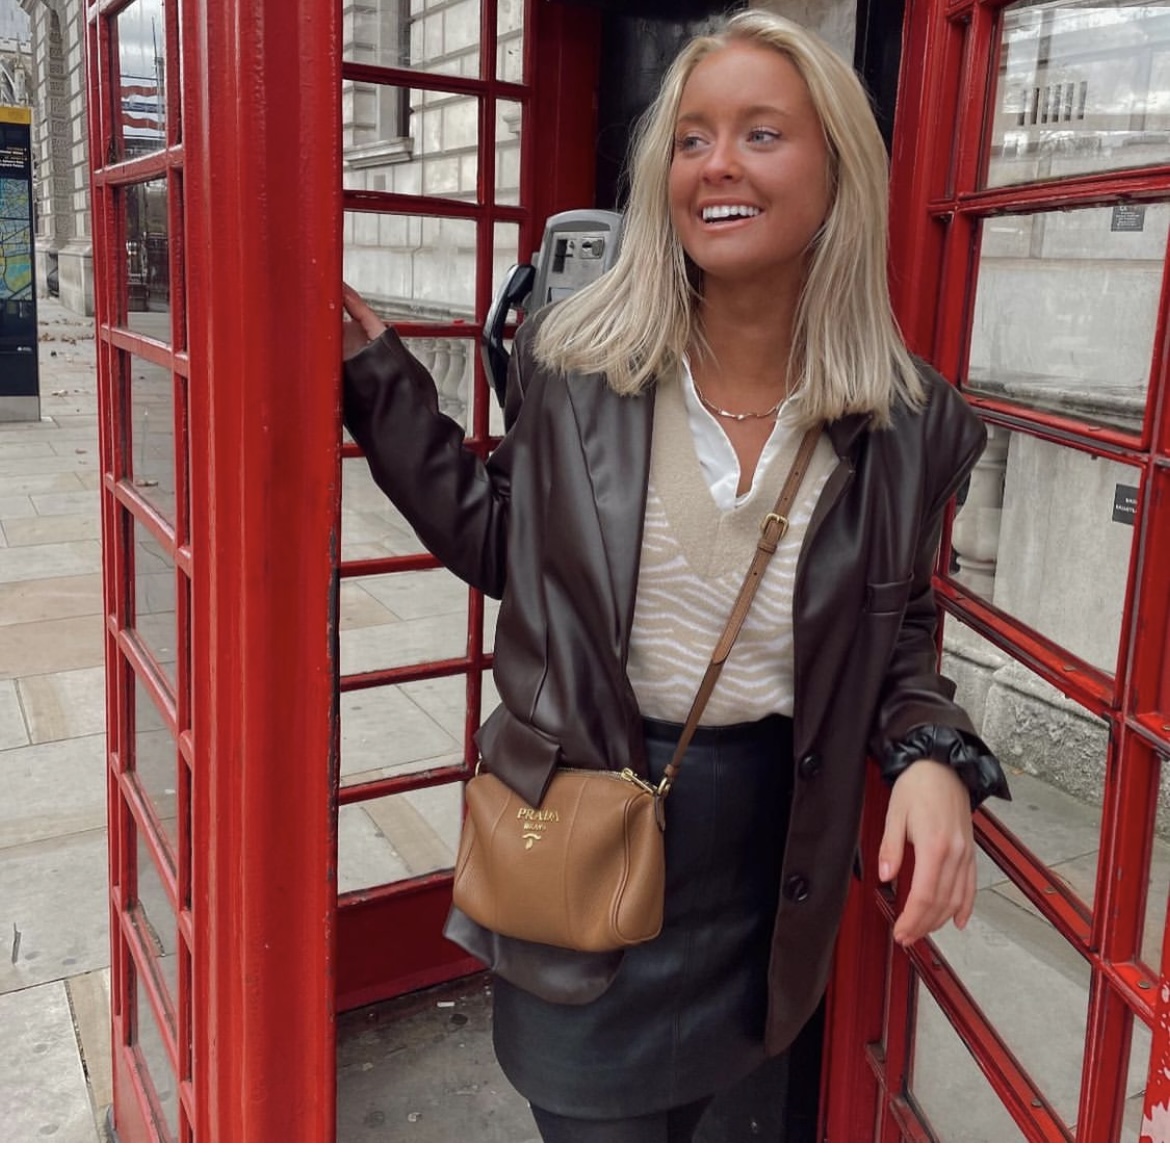 Me in a telephone booth in London